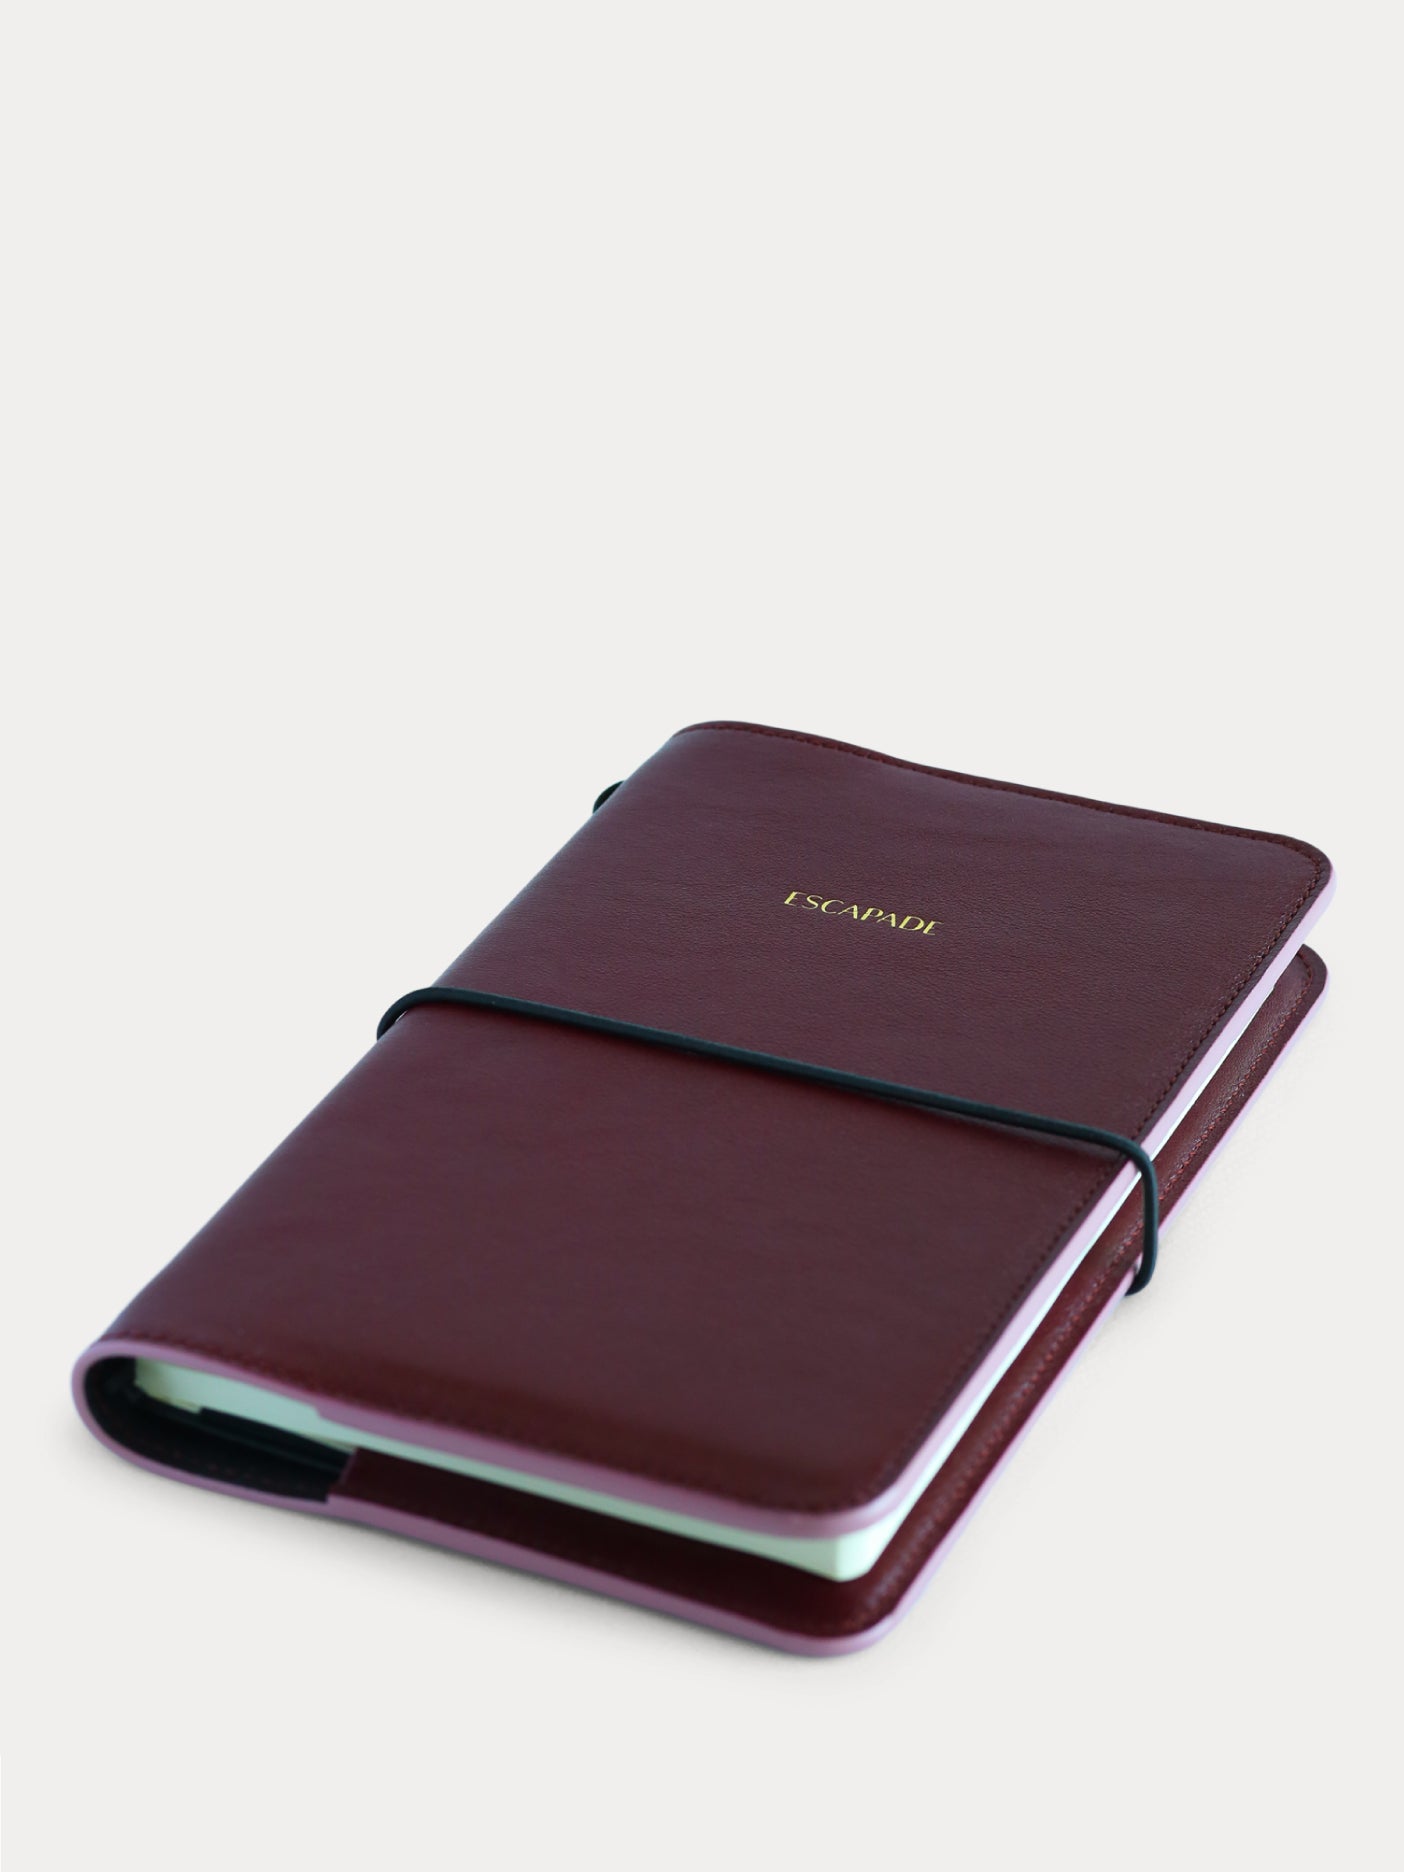 handcrafted leather notebook